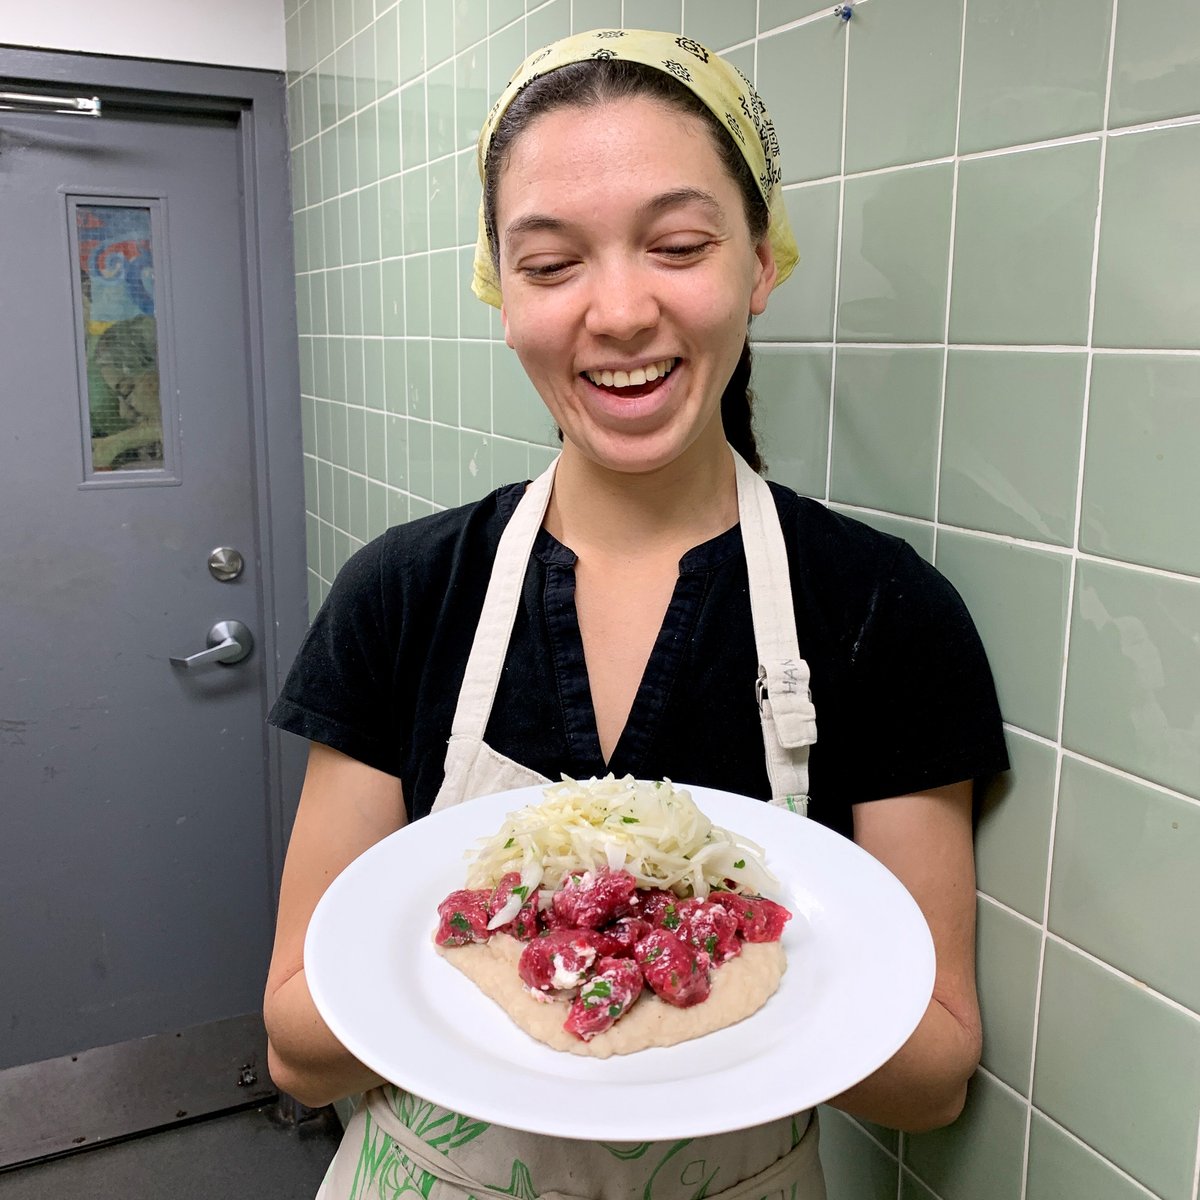 Bright, beautiful beet gnocchi for participants of our Healthy Beginnings program today! Thank you to our Community Chef, Hannah, and amazing volunteers for the meal. 💗